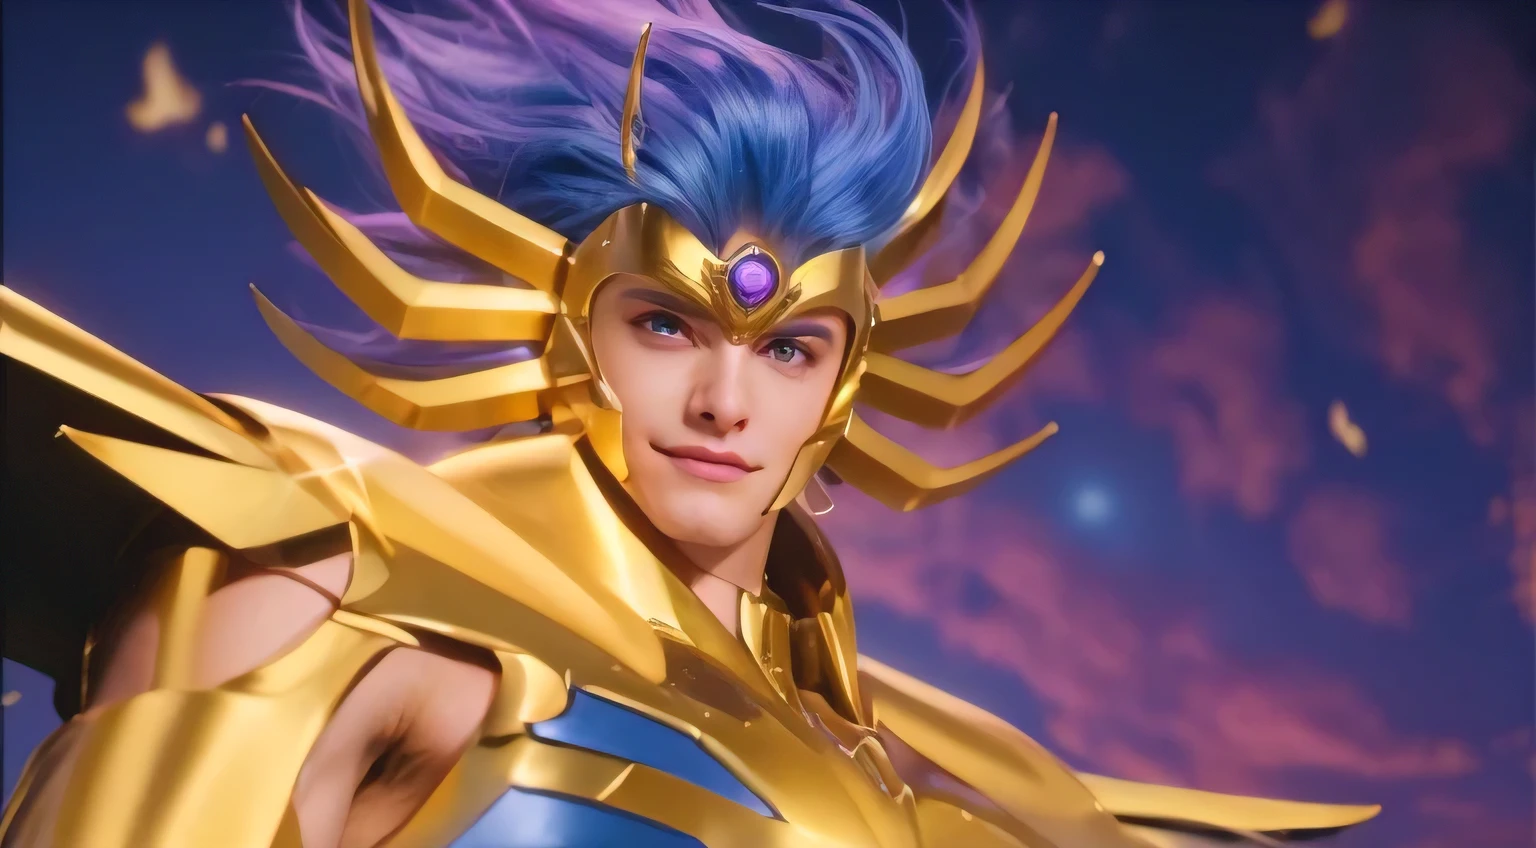 In a masterpiece of the highest quality (best quality:1.2), there is a MAN named Cancer from Saint Seiya, dressed as Cancer. The background is set in Greece, with its distinctive architecture and beautiful landscapes. Cancer has vibrant purple hair that adds a touch of uniqueness to his appearance. His face is well-defined and exudes a sense of strength and determination. The man's presence dominates the composition, showcasing his powerful character.beautiful androgynous face,face Cancer deathmask Saint seiya,evil face ,evil smile,jack nicolson face